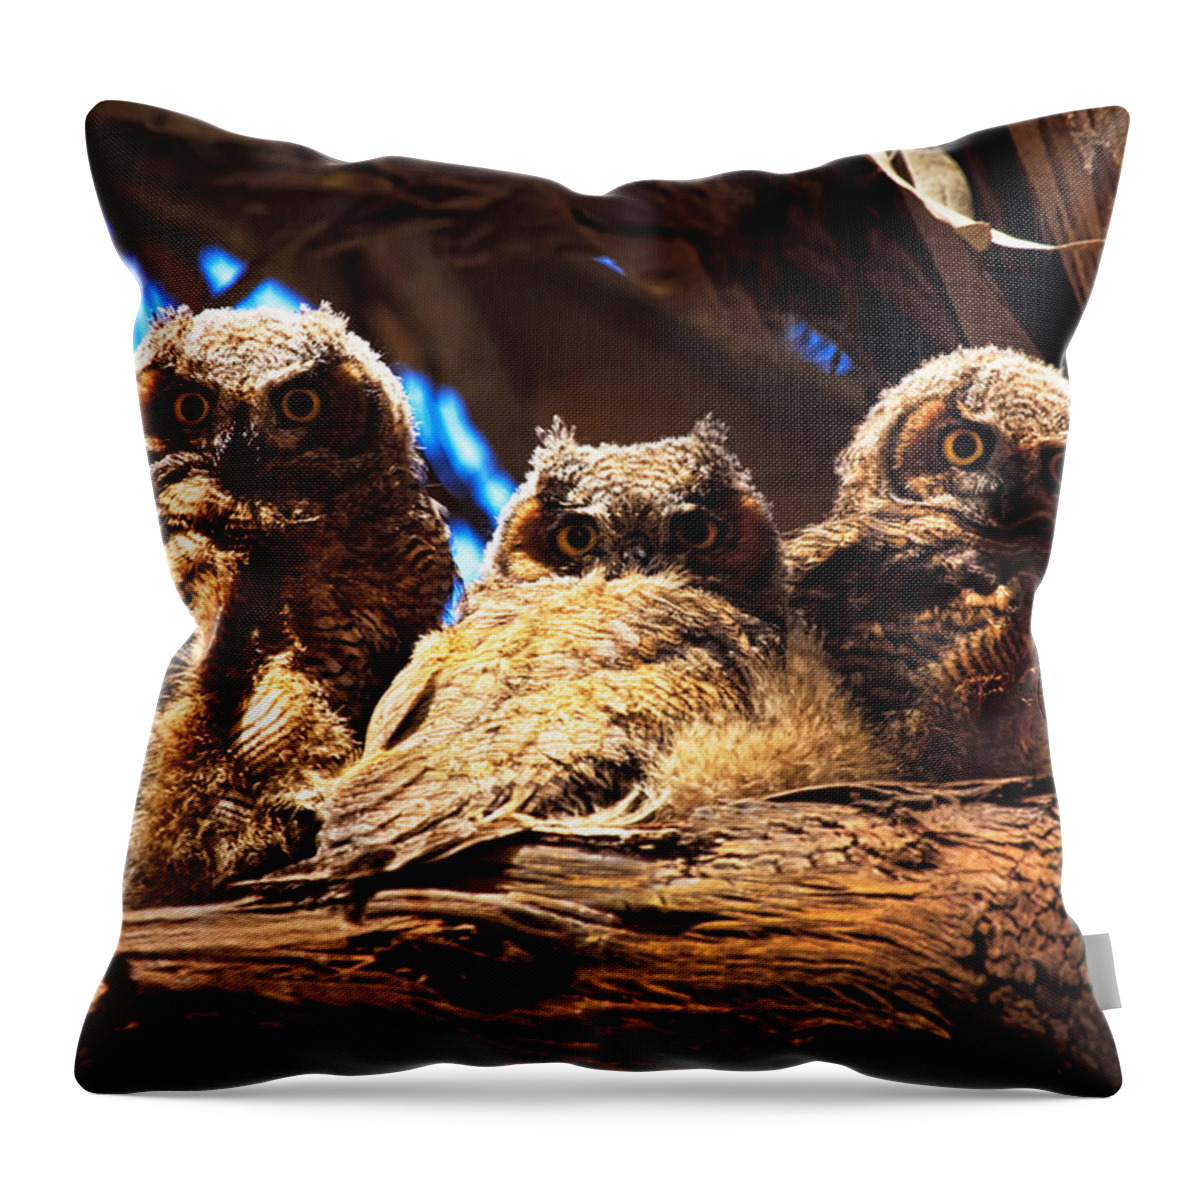 Owl Throw Pillow featuring the photograph Hoo Are You by Beth Sargent